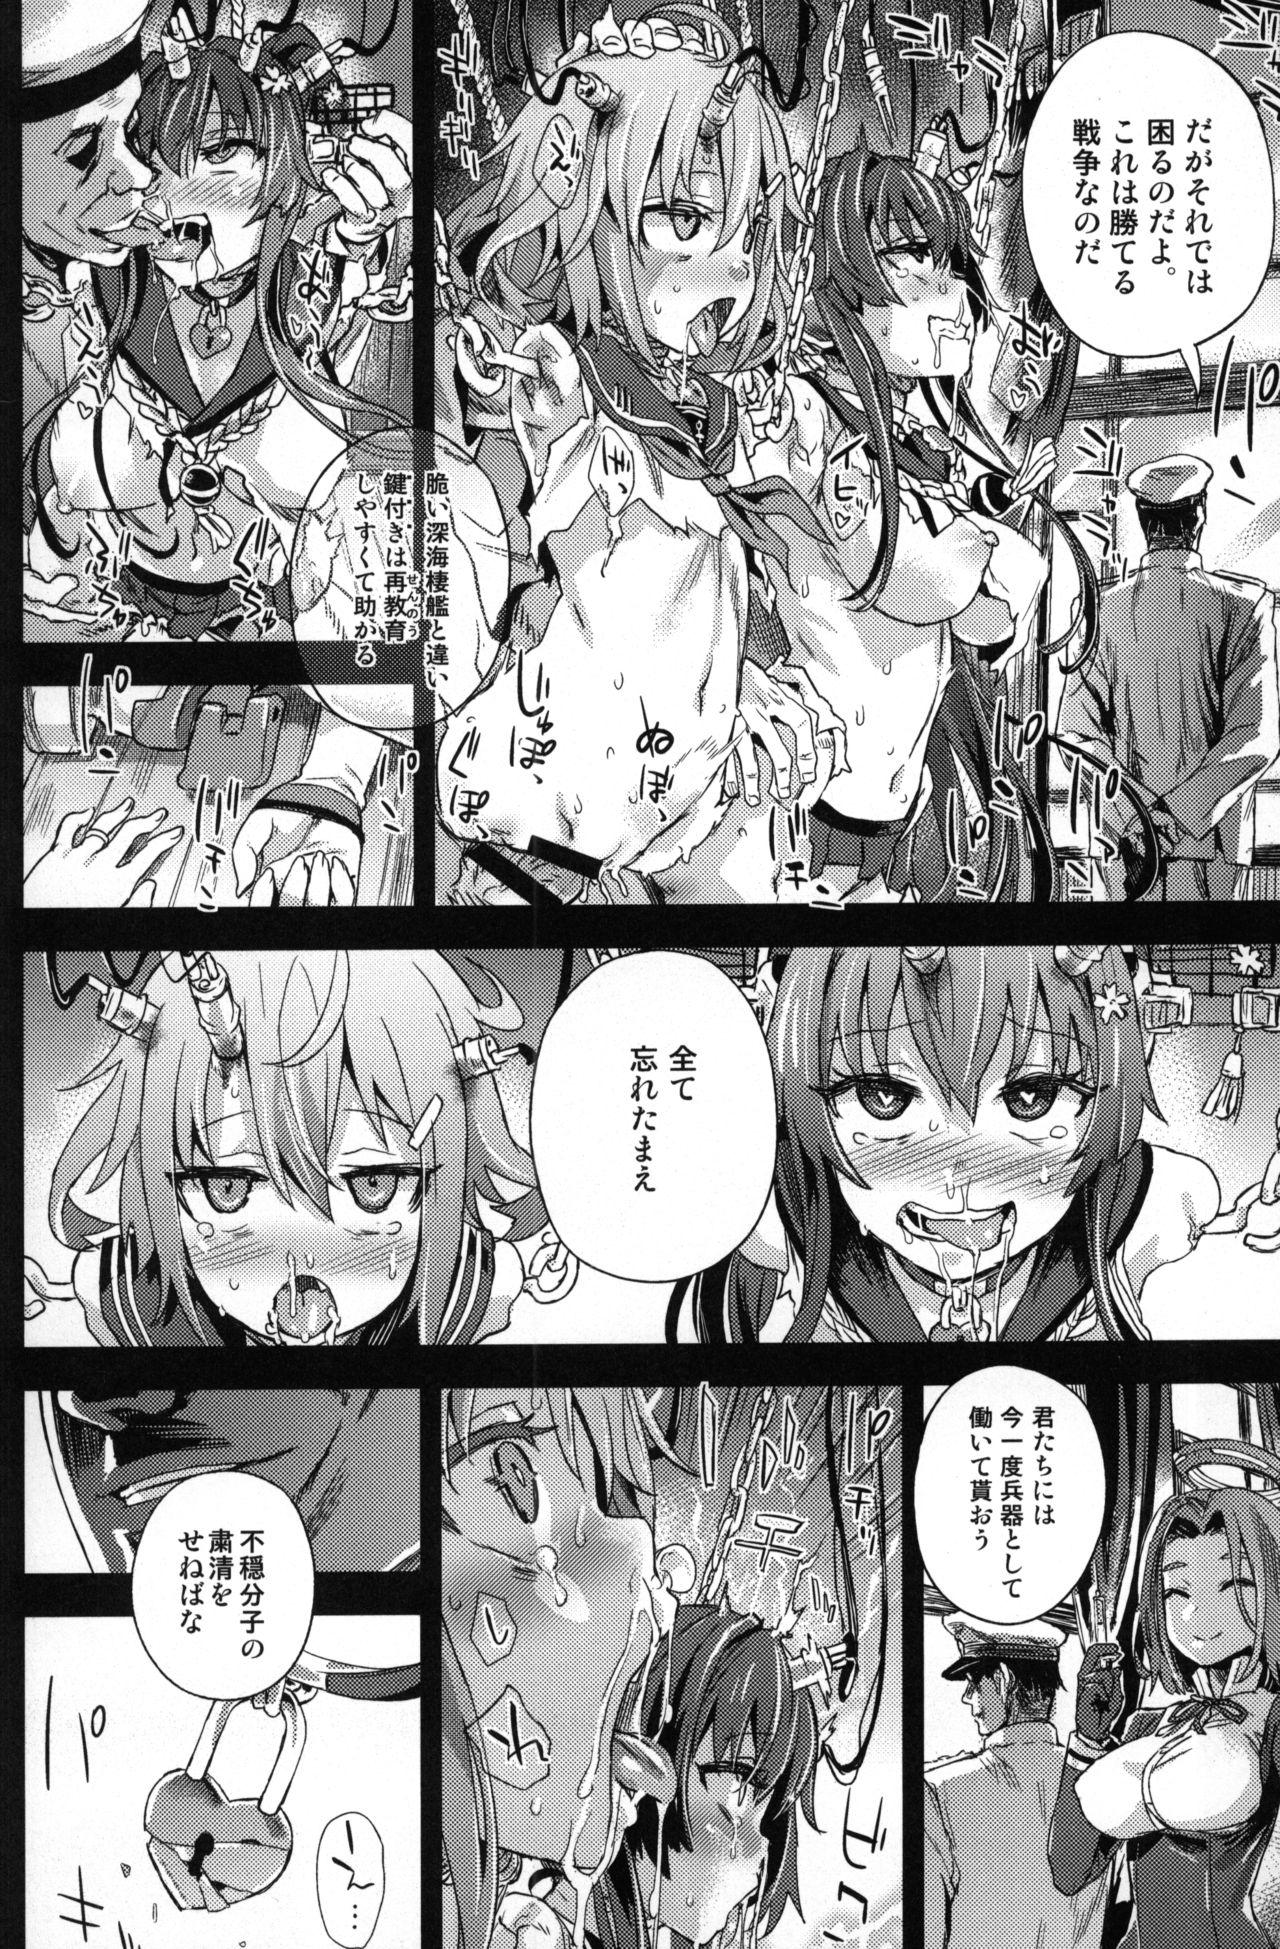 Highschool VictimGirls 17 SOS - Kantai collection Young Petite Porn - Page 37